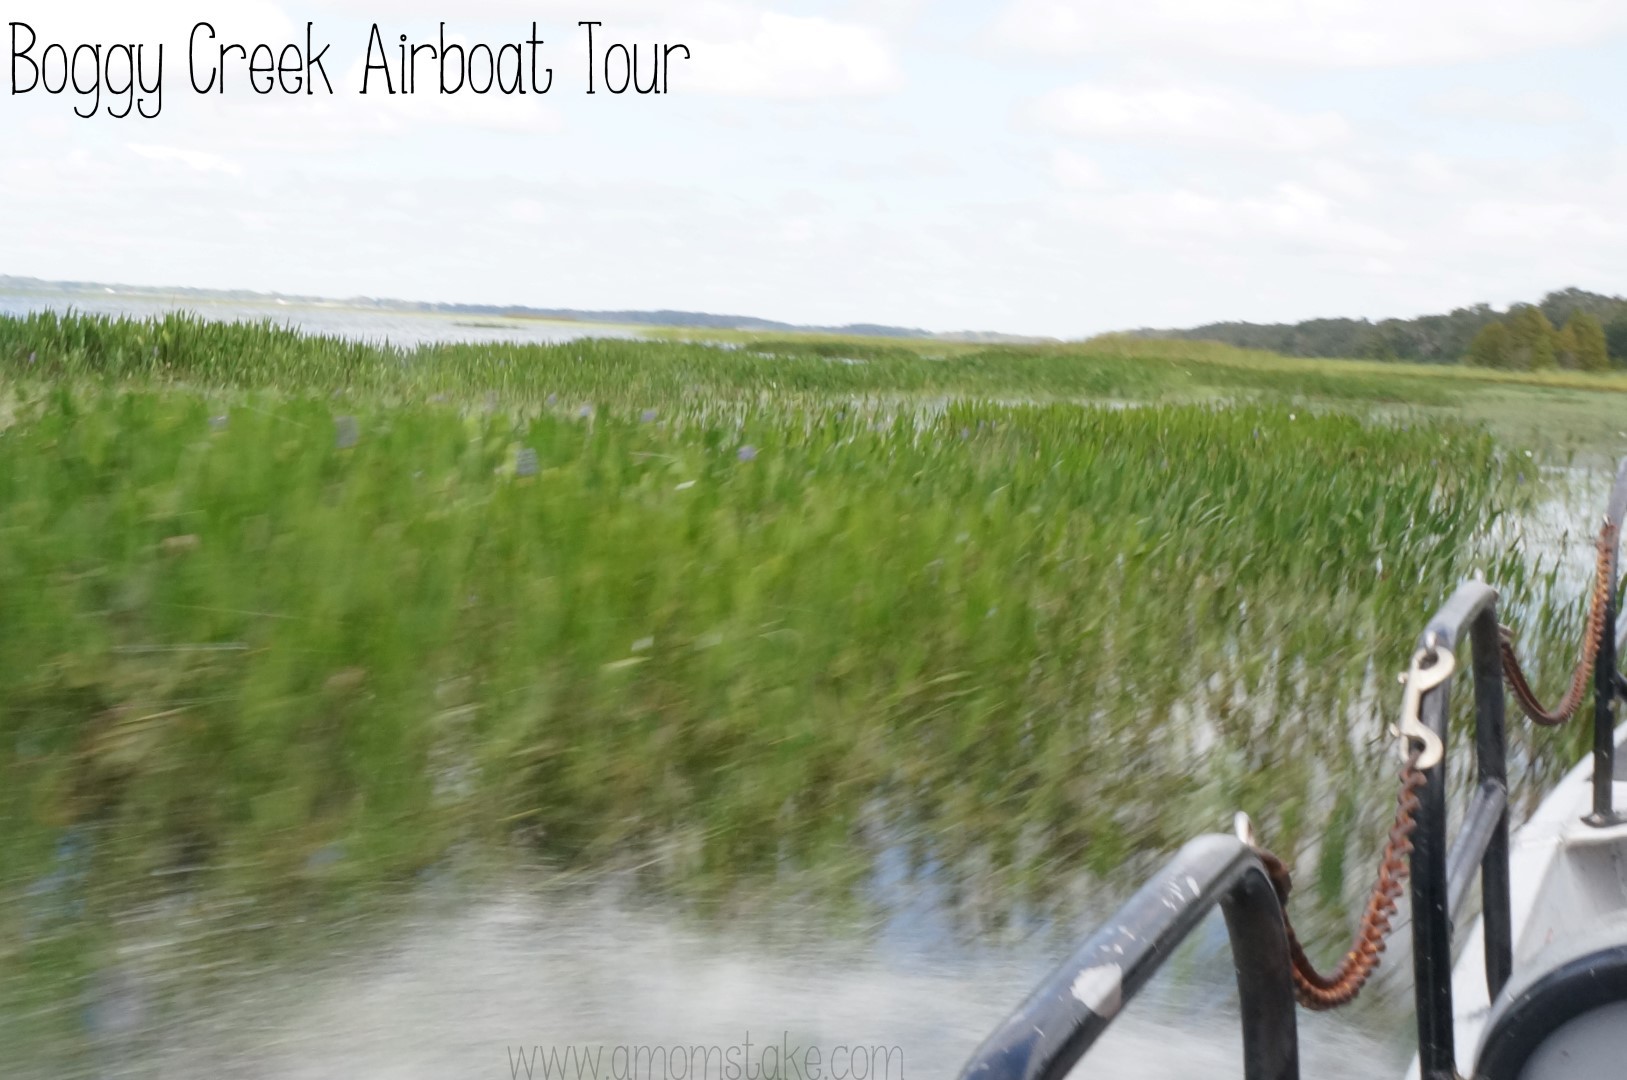 Boggy Creek Airboat Tour